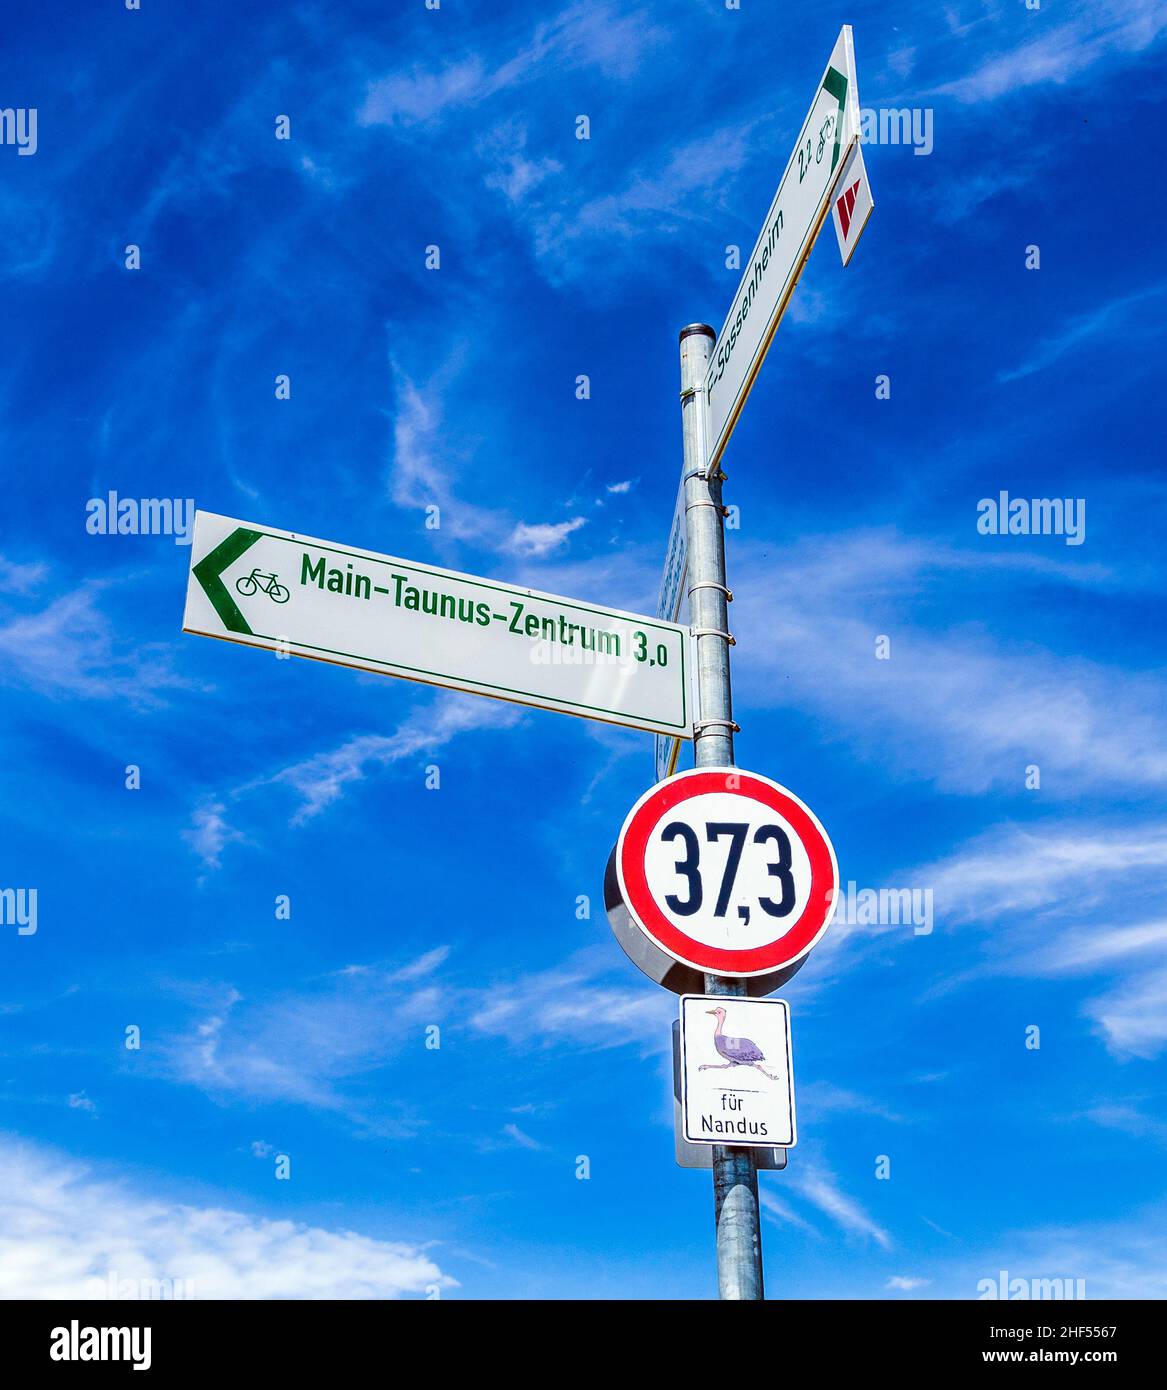 street sign for nandus under blue sky in Germany Stock Photo